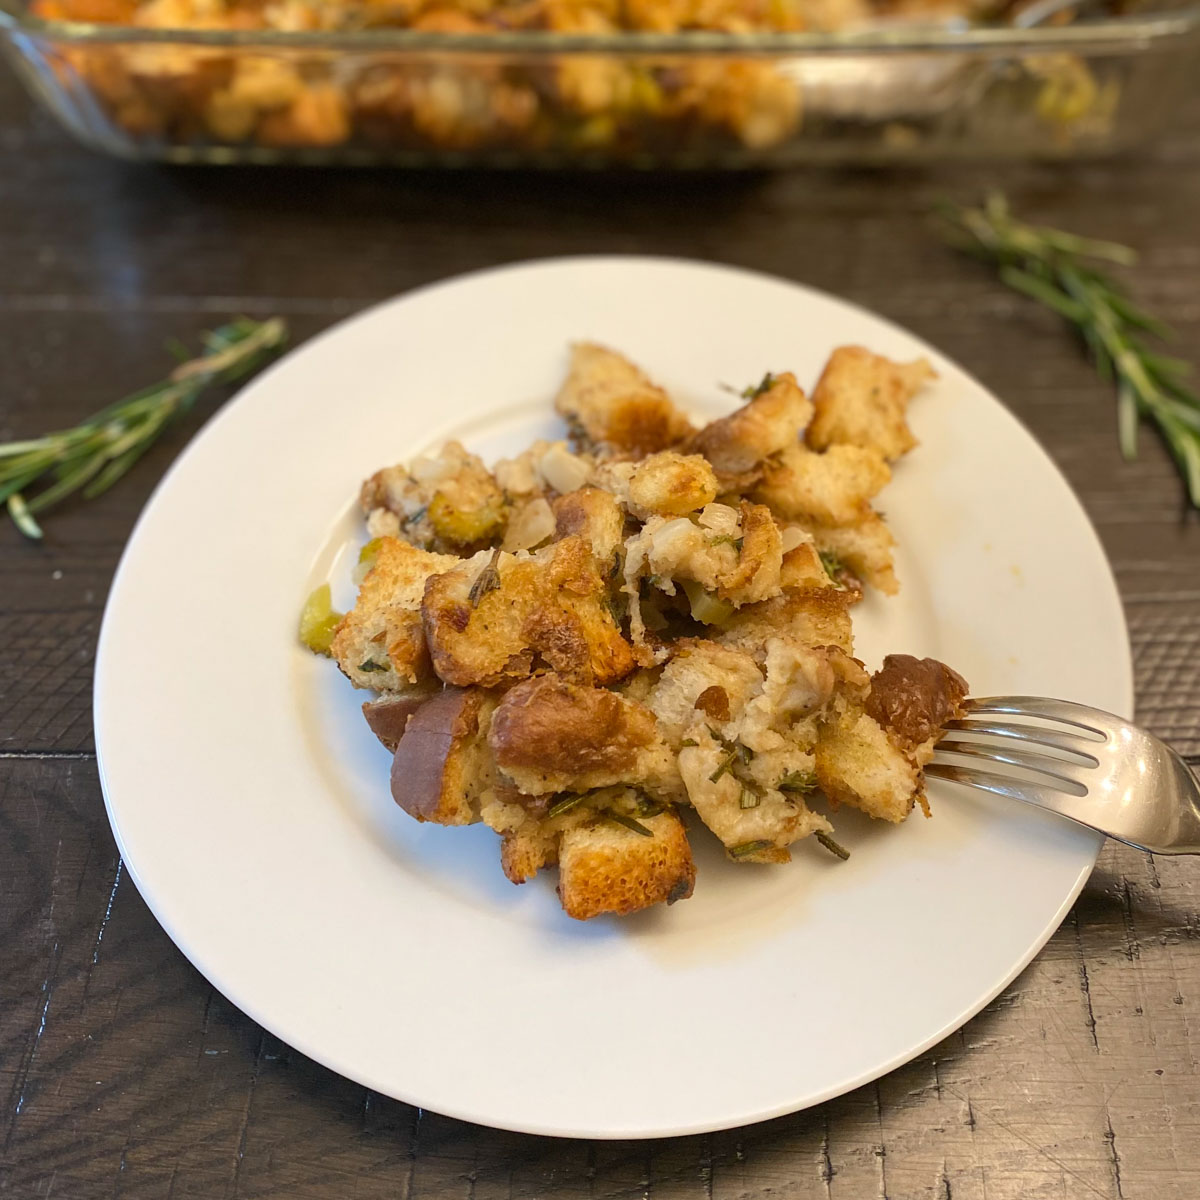 Plate of stuffing on a table.